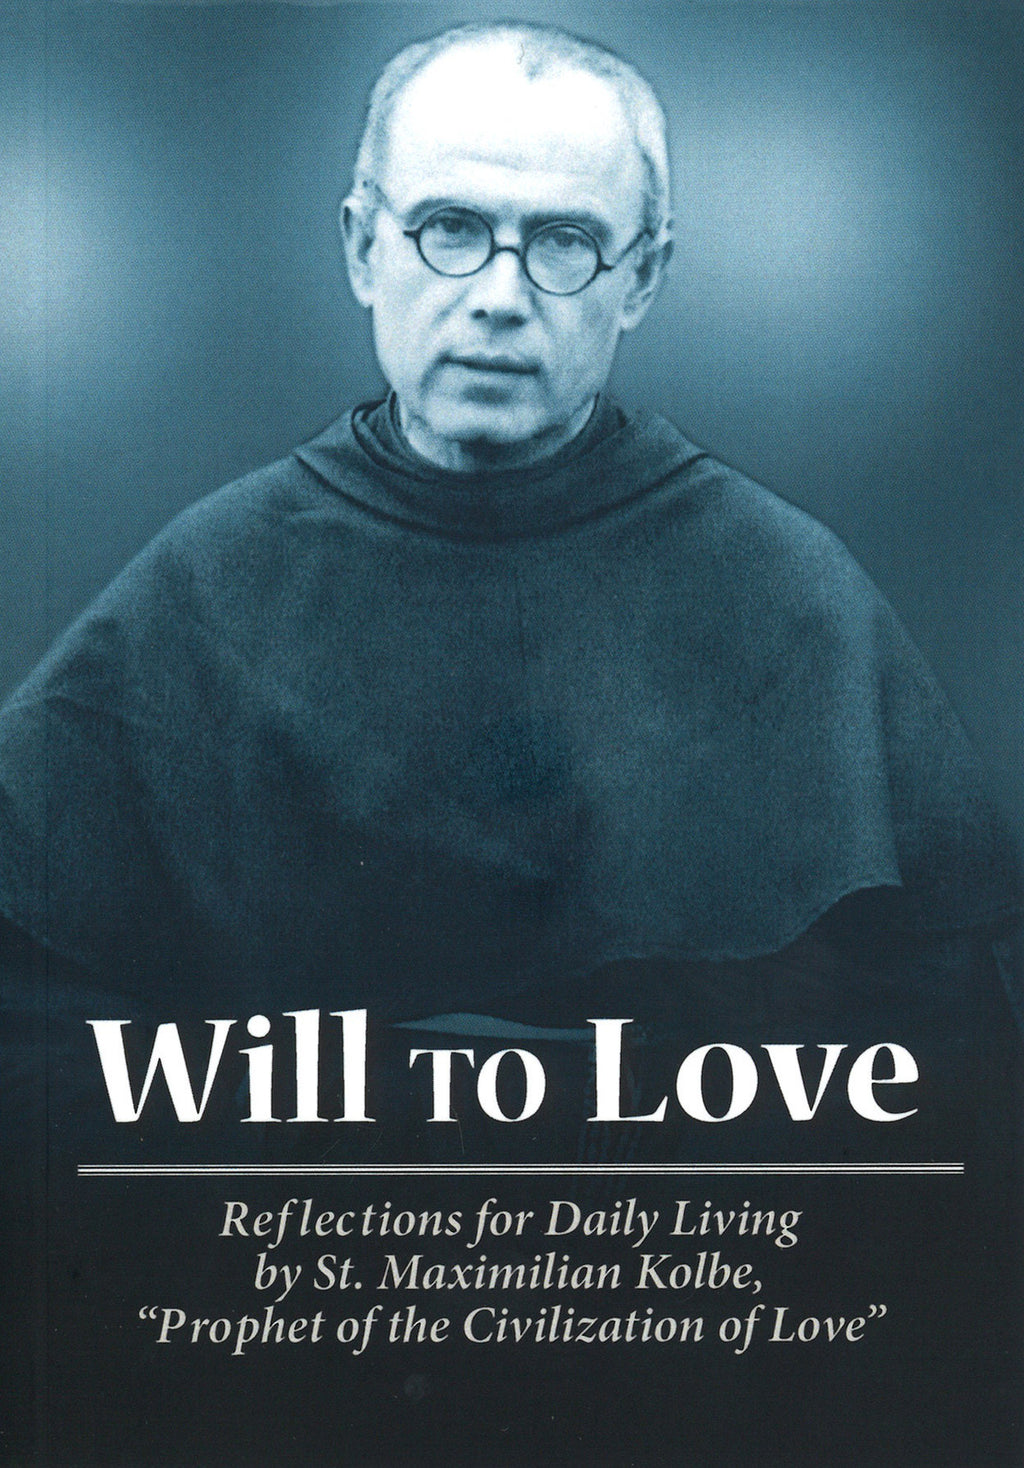 Will to love. Reflections for Daily Living by St. Maximilian Kolbe, "Prophet of the Civilization of Love" Front cover has a picture of St. Maximilian Kolbe. 